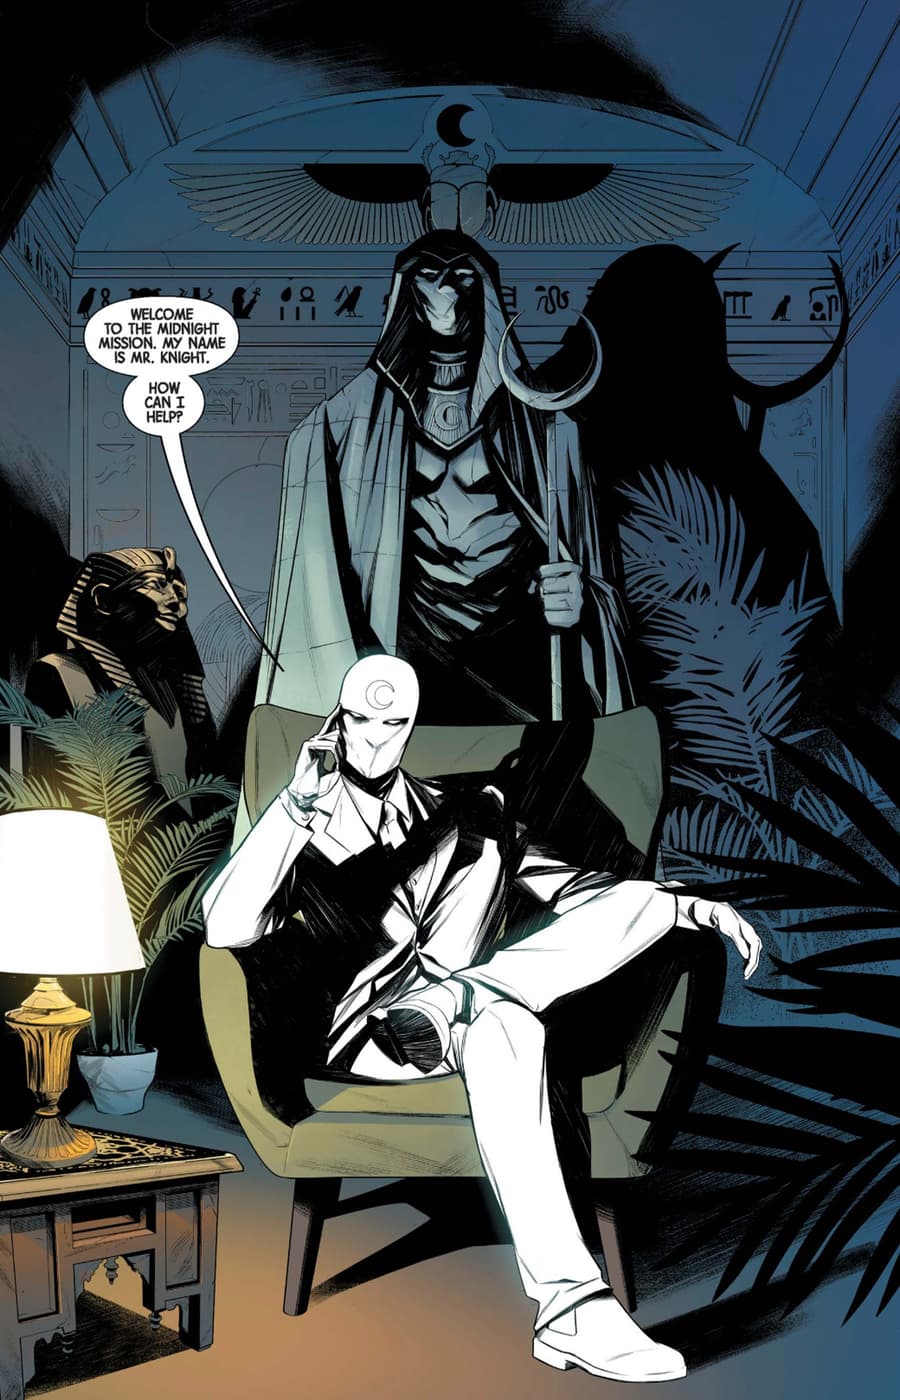 MOON KNIGHT (2021) #1 page by Jed MacKay and Alessandro Cappuccio